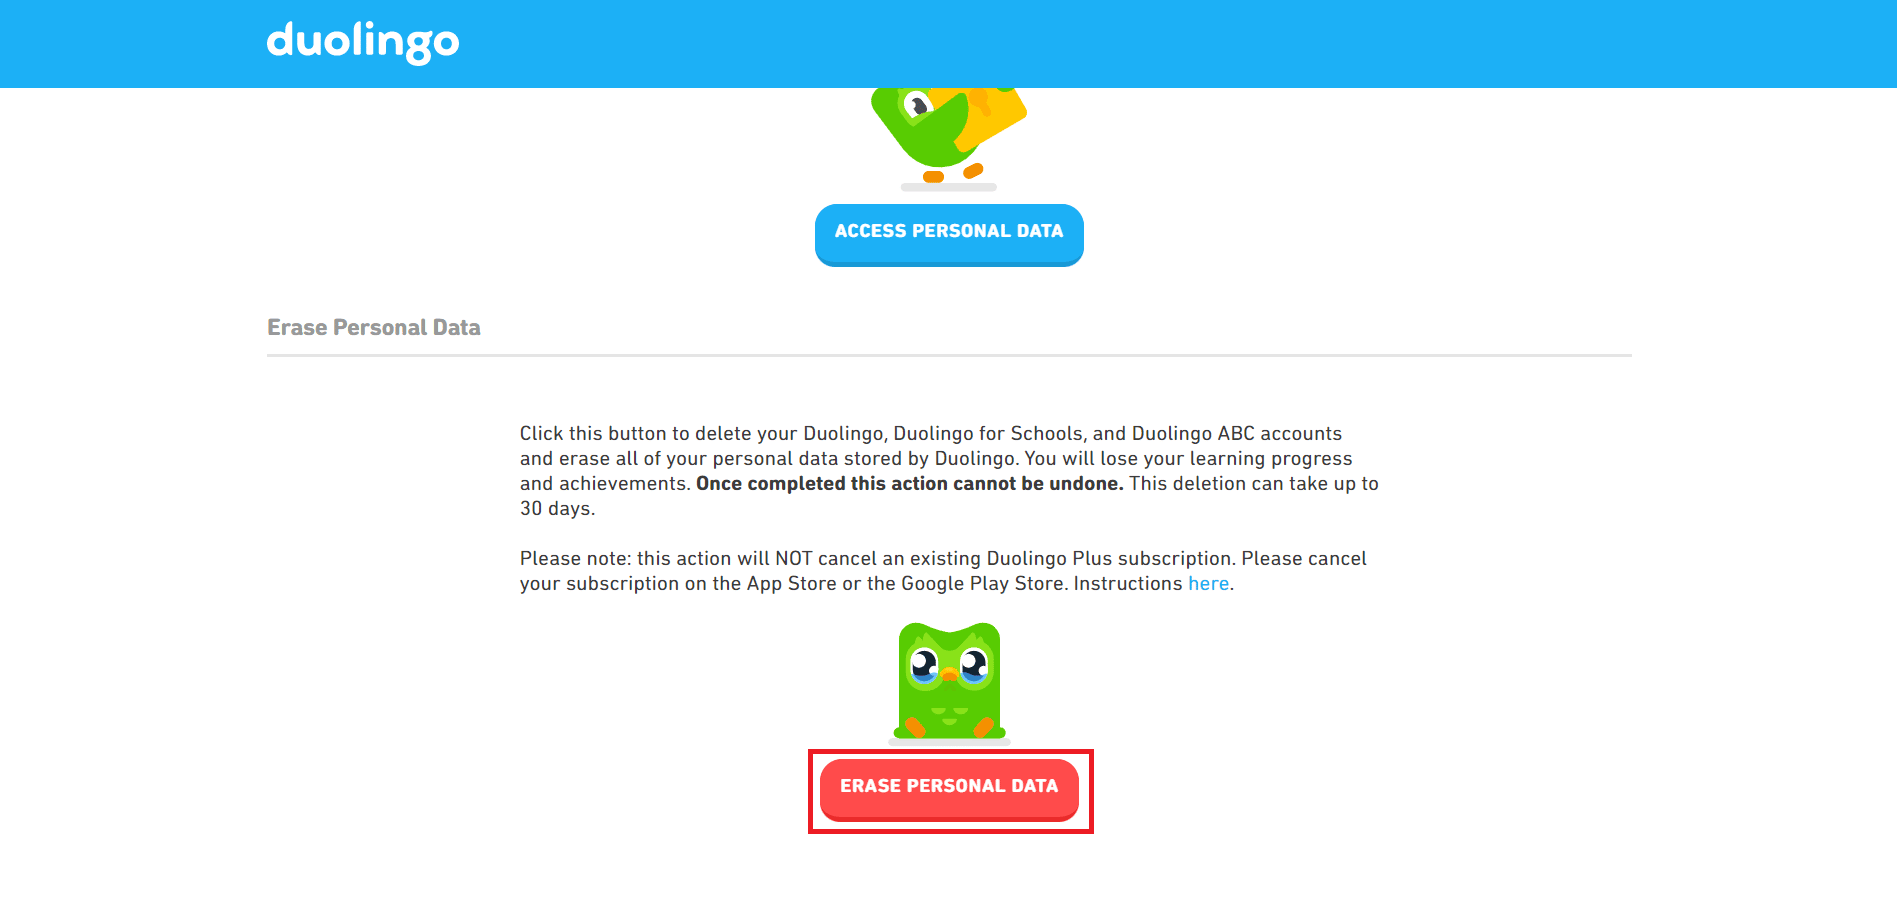 Click on ERASE PERSONAL DATA on the redirected Duolingo Drive-Thru page